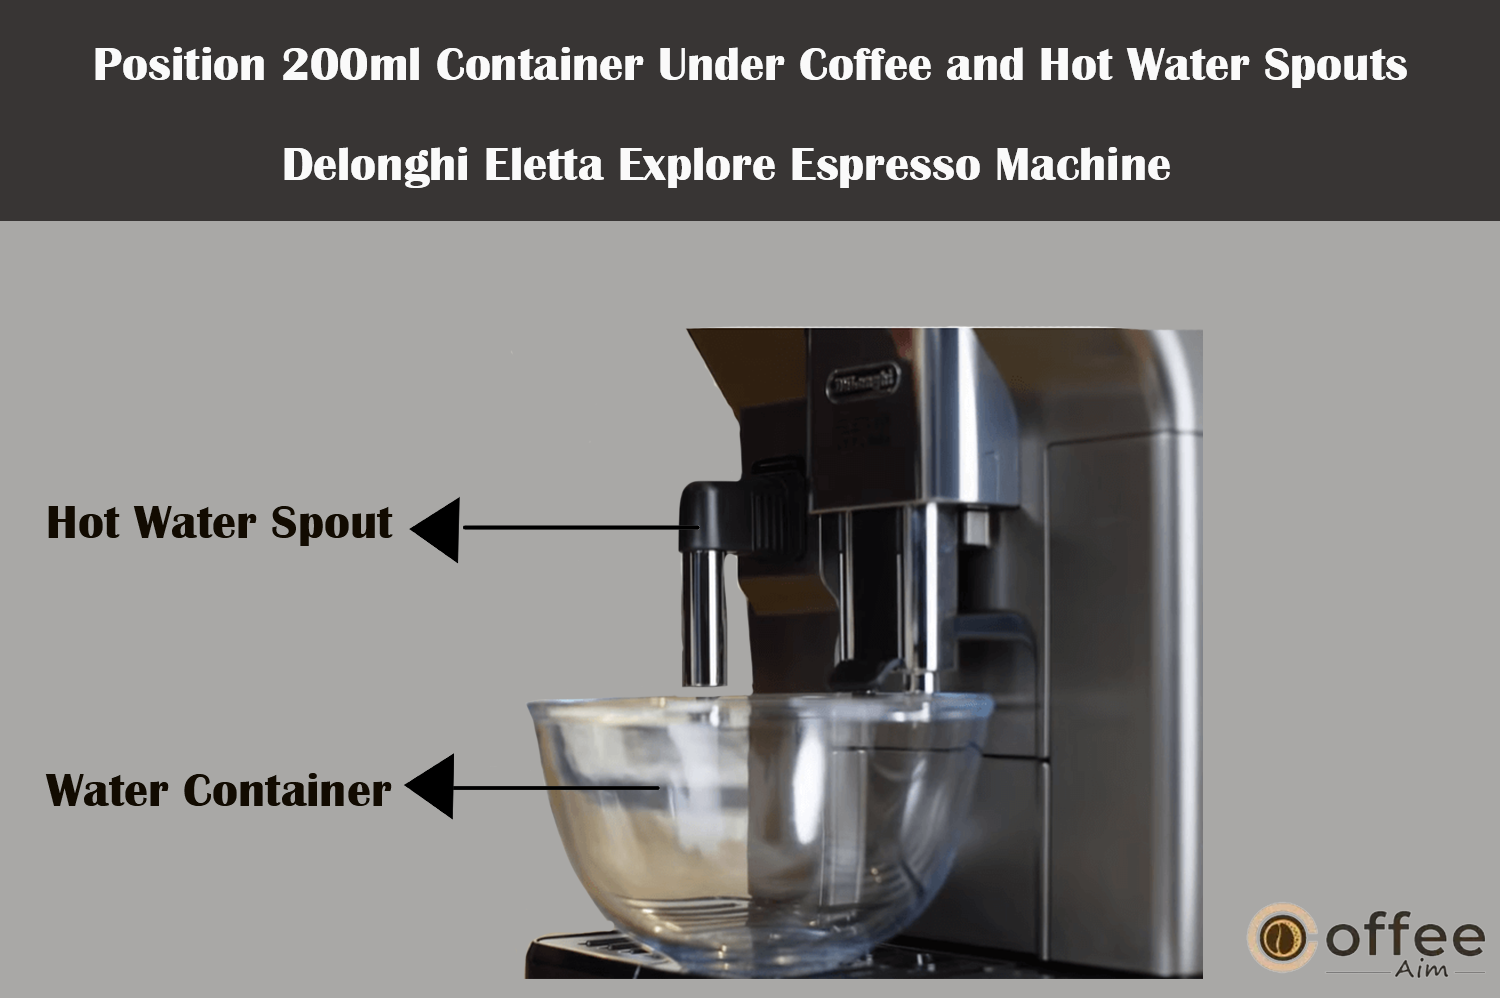 This image instructs you to position a container with a minimum capacity of 200 ml beneath the coffee spouts and hot water spout of the Delonghi Eletta Explore Espresso Machine, as outlined in the article "How to Use the Delonghi Eletta Explore Espresso Machine."